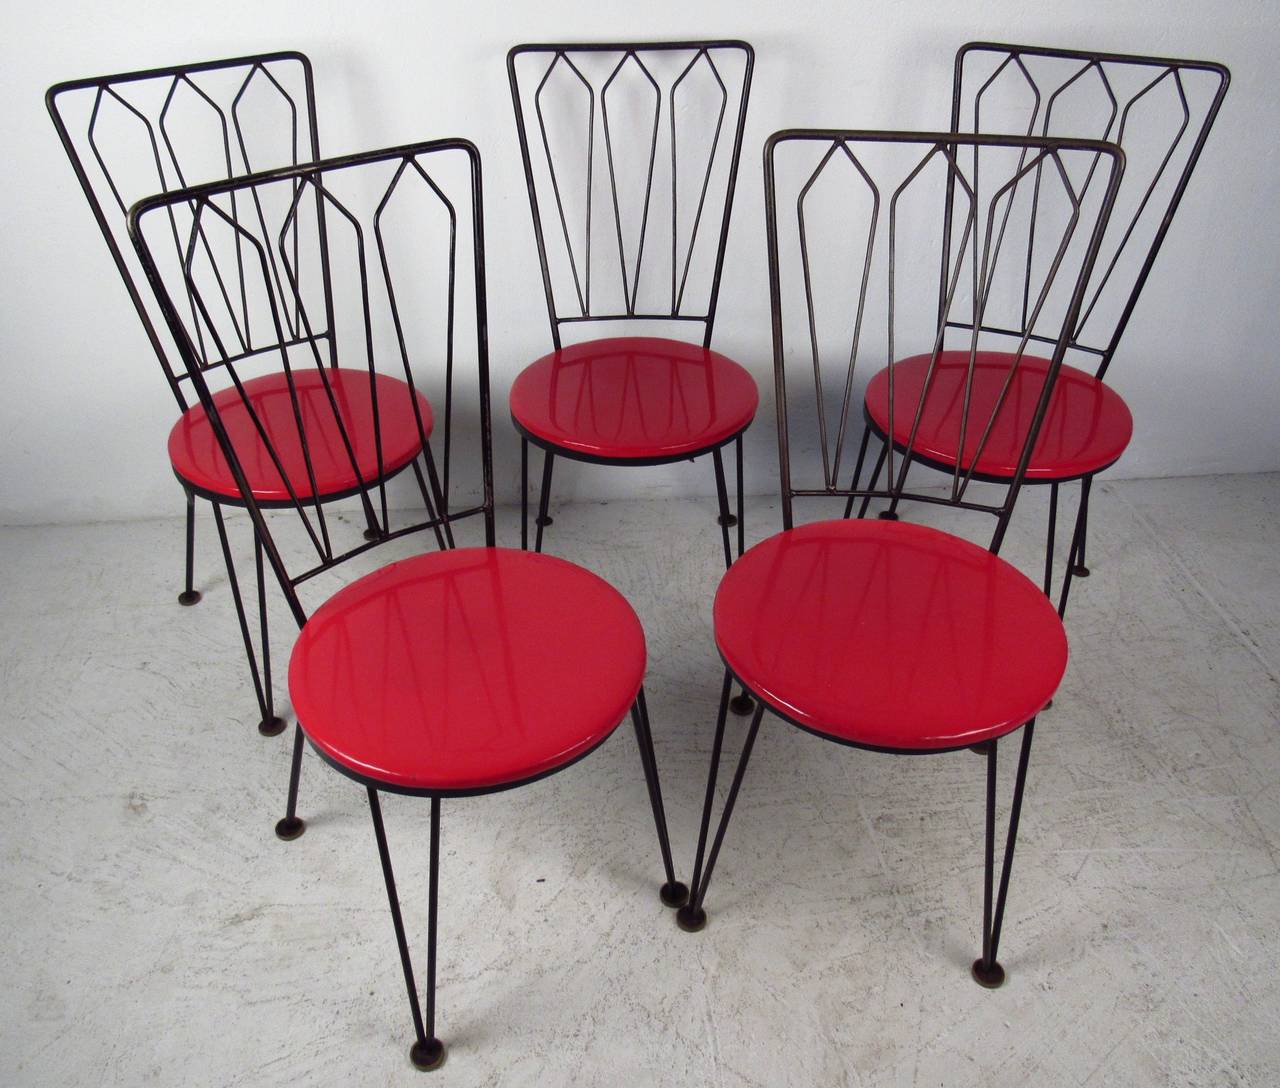 Great set of 1950s retro style metal and vinyl seat dining chairs. A sleek mid-century design with hairpin style legs, geometrical designs on the backrest, and circular cushioned seats covered in cherry red vinyl. Please confirm item location (NY or